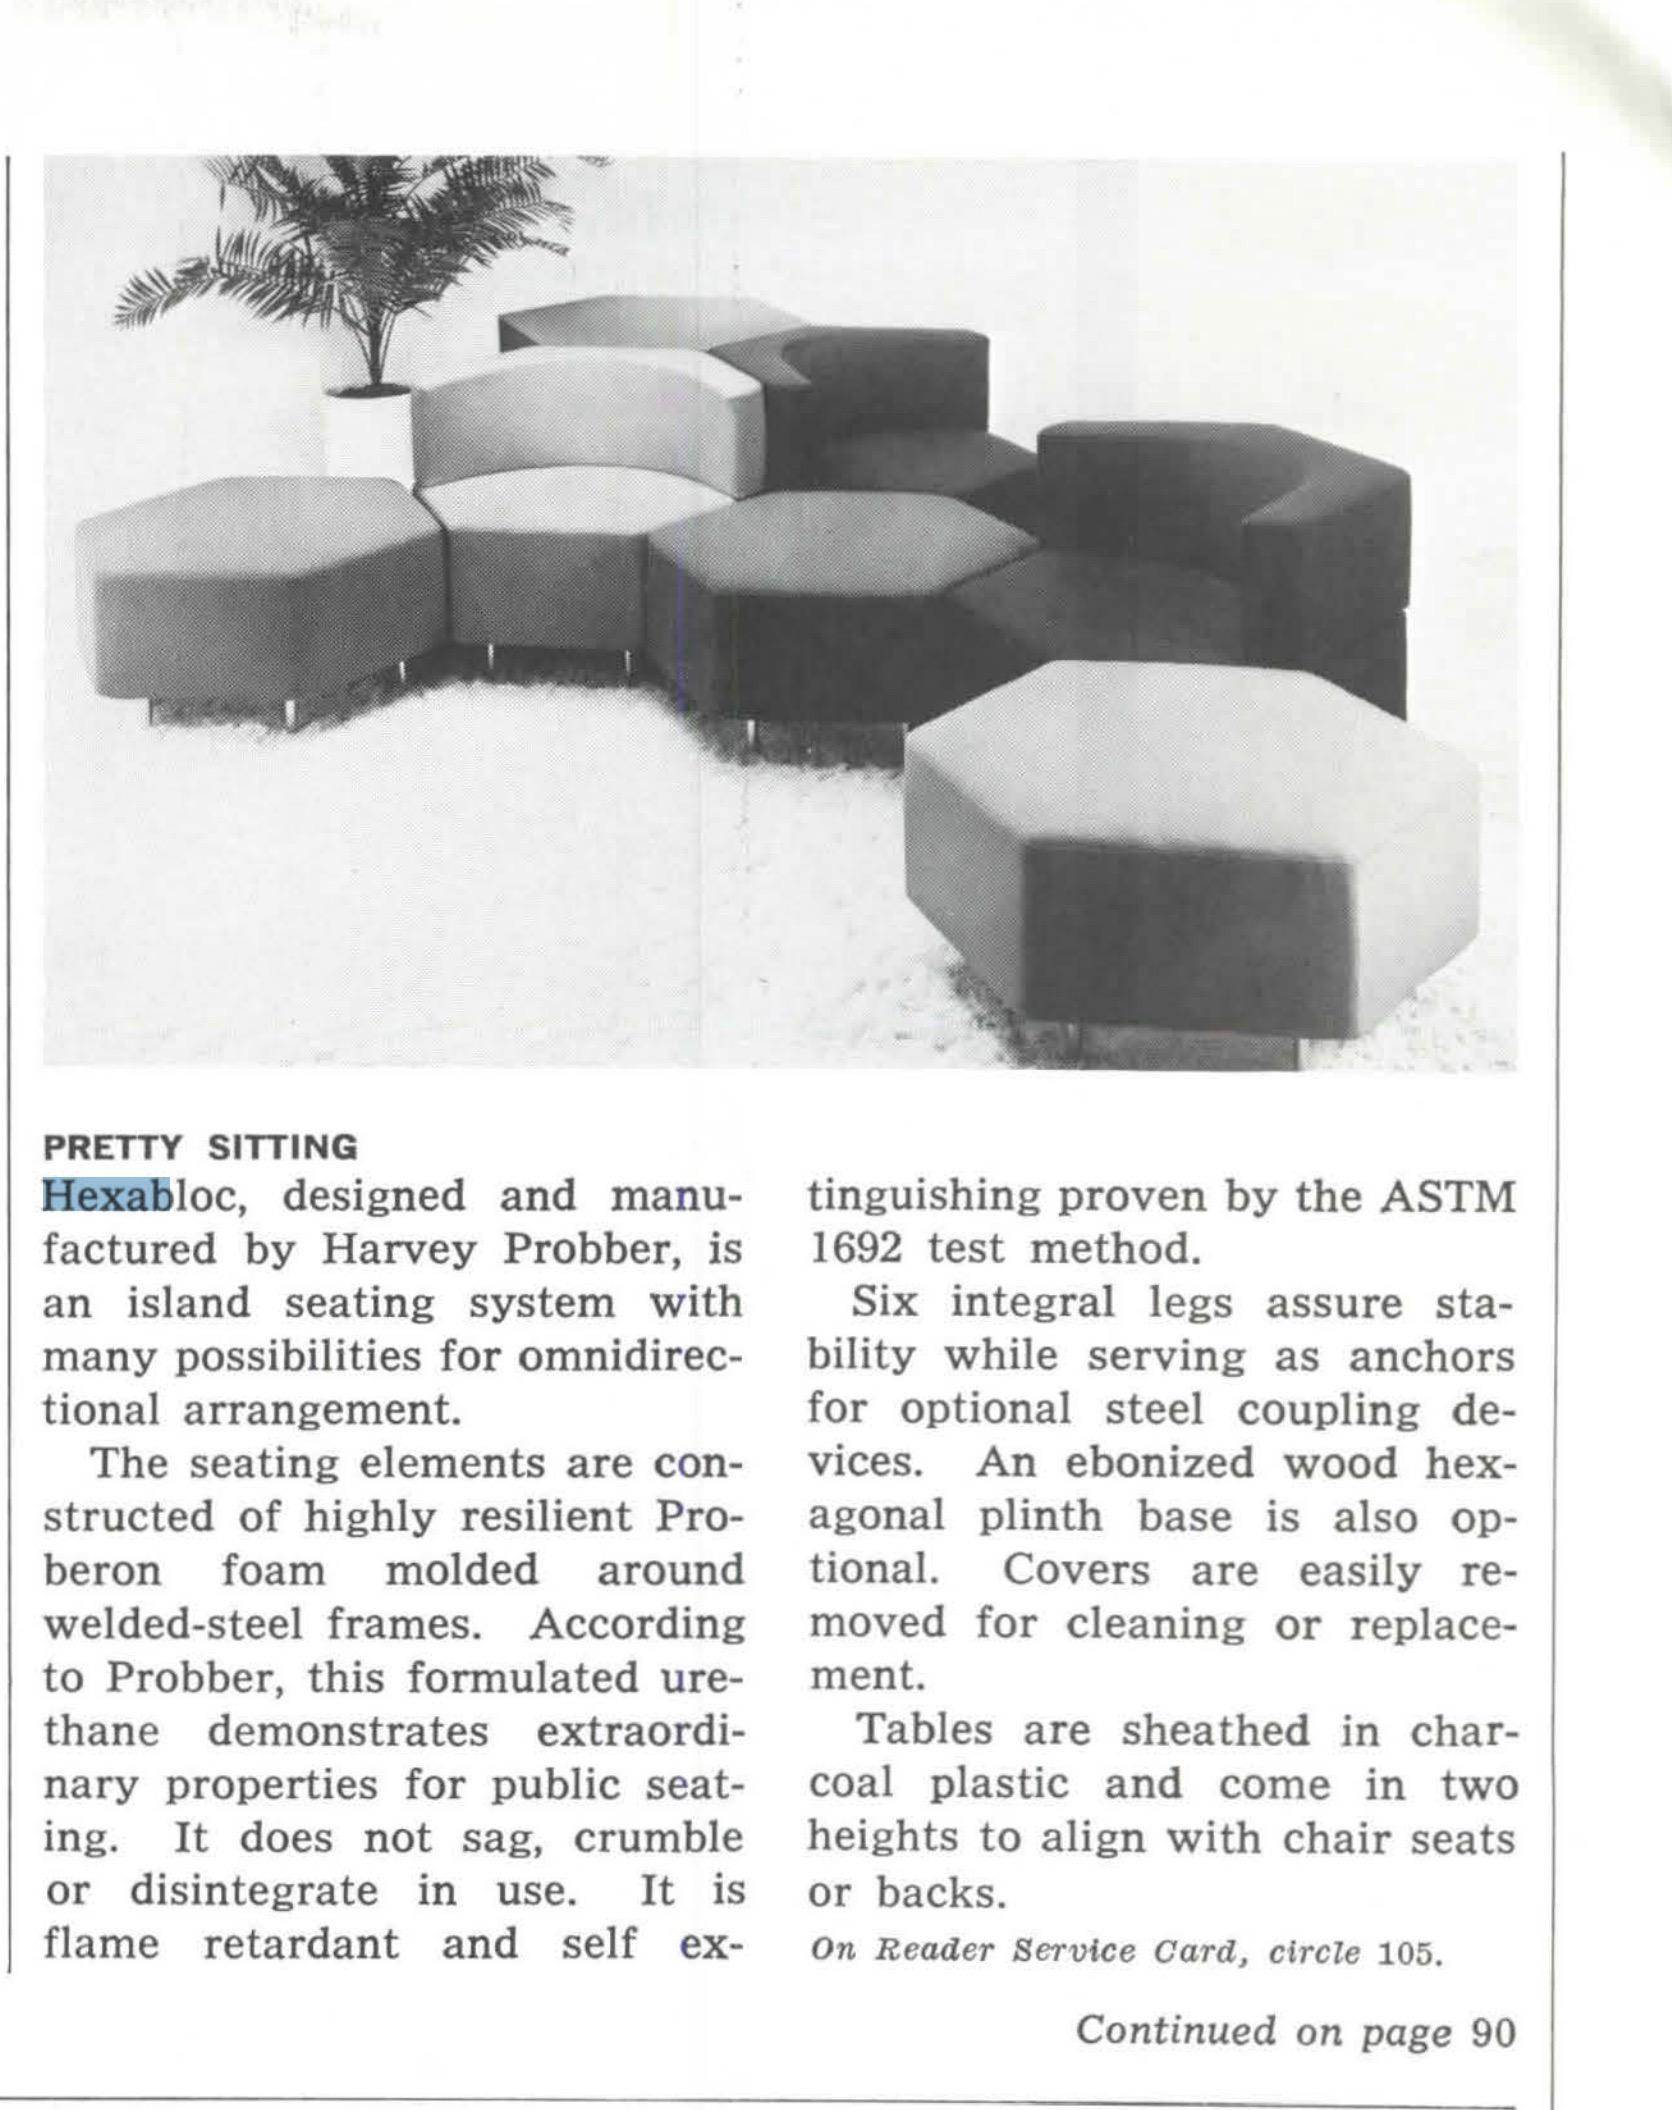 Original hexagonal chair designed by Harvey Probber for his Hexabloc island seating system with many possibilities for omnidirectional arrangement.
Constructed of highly resilient 